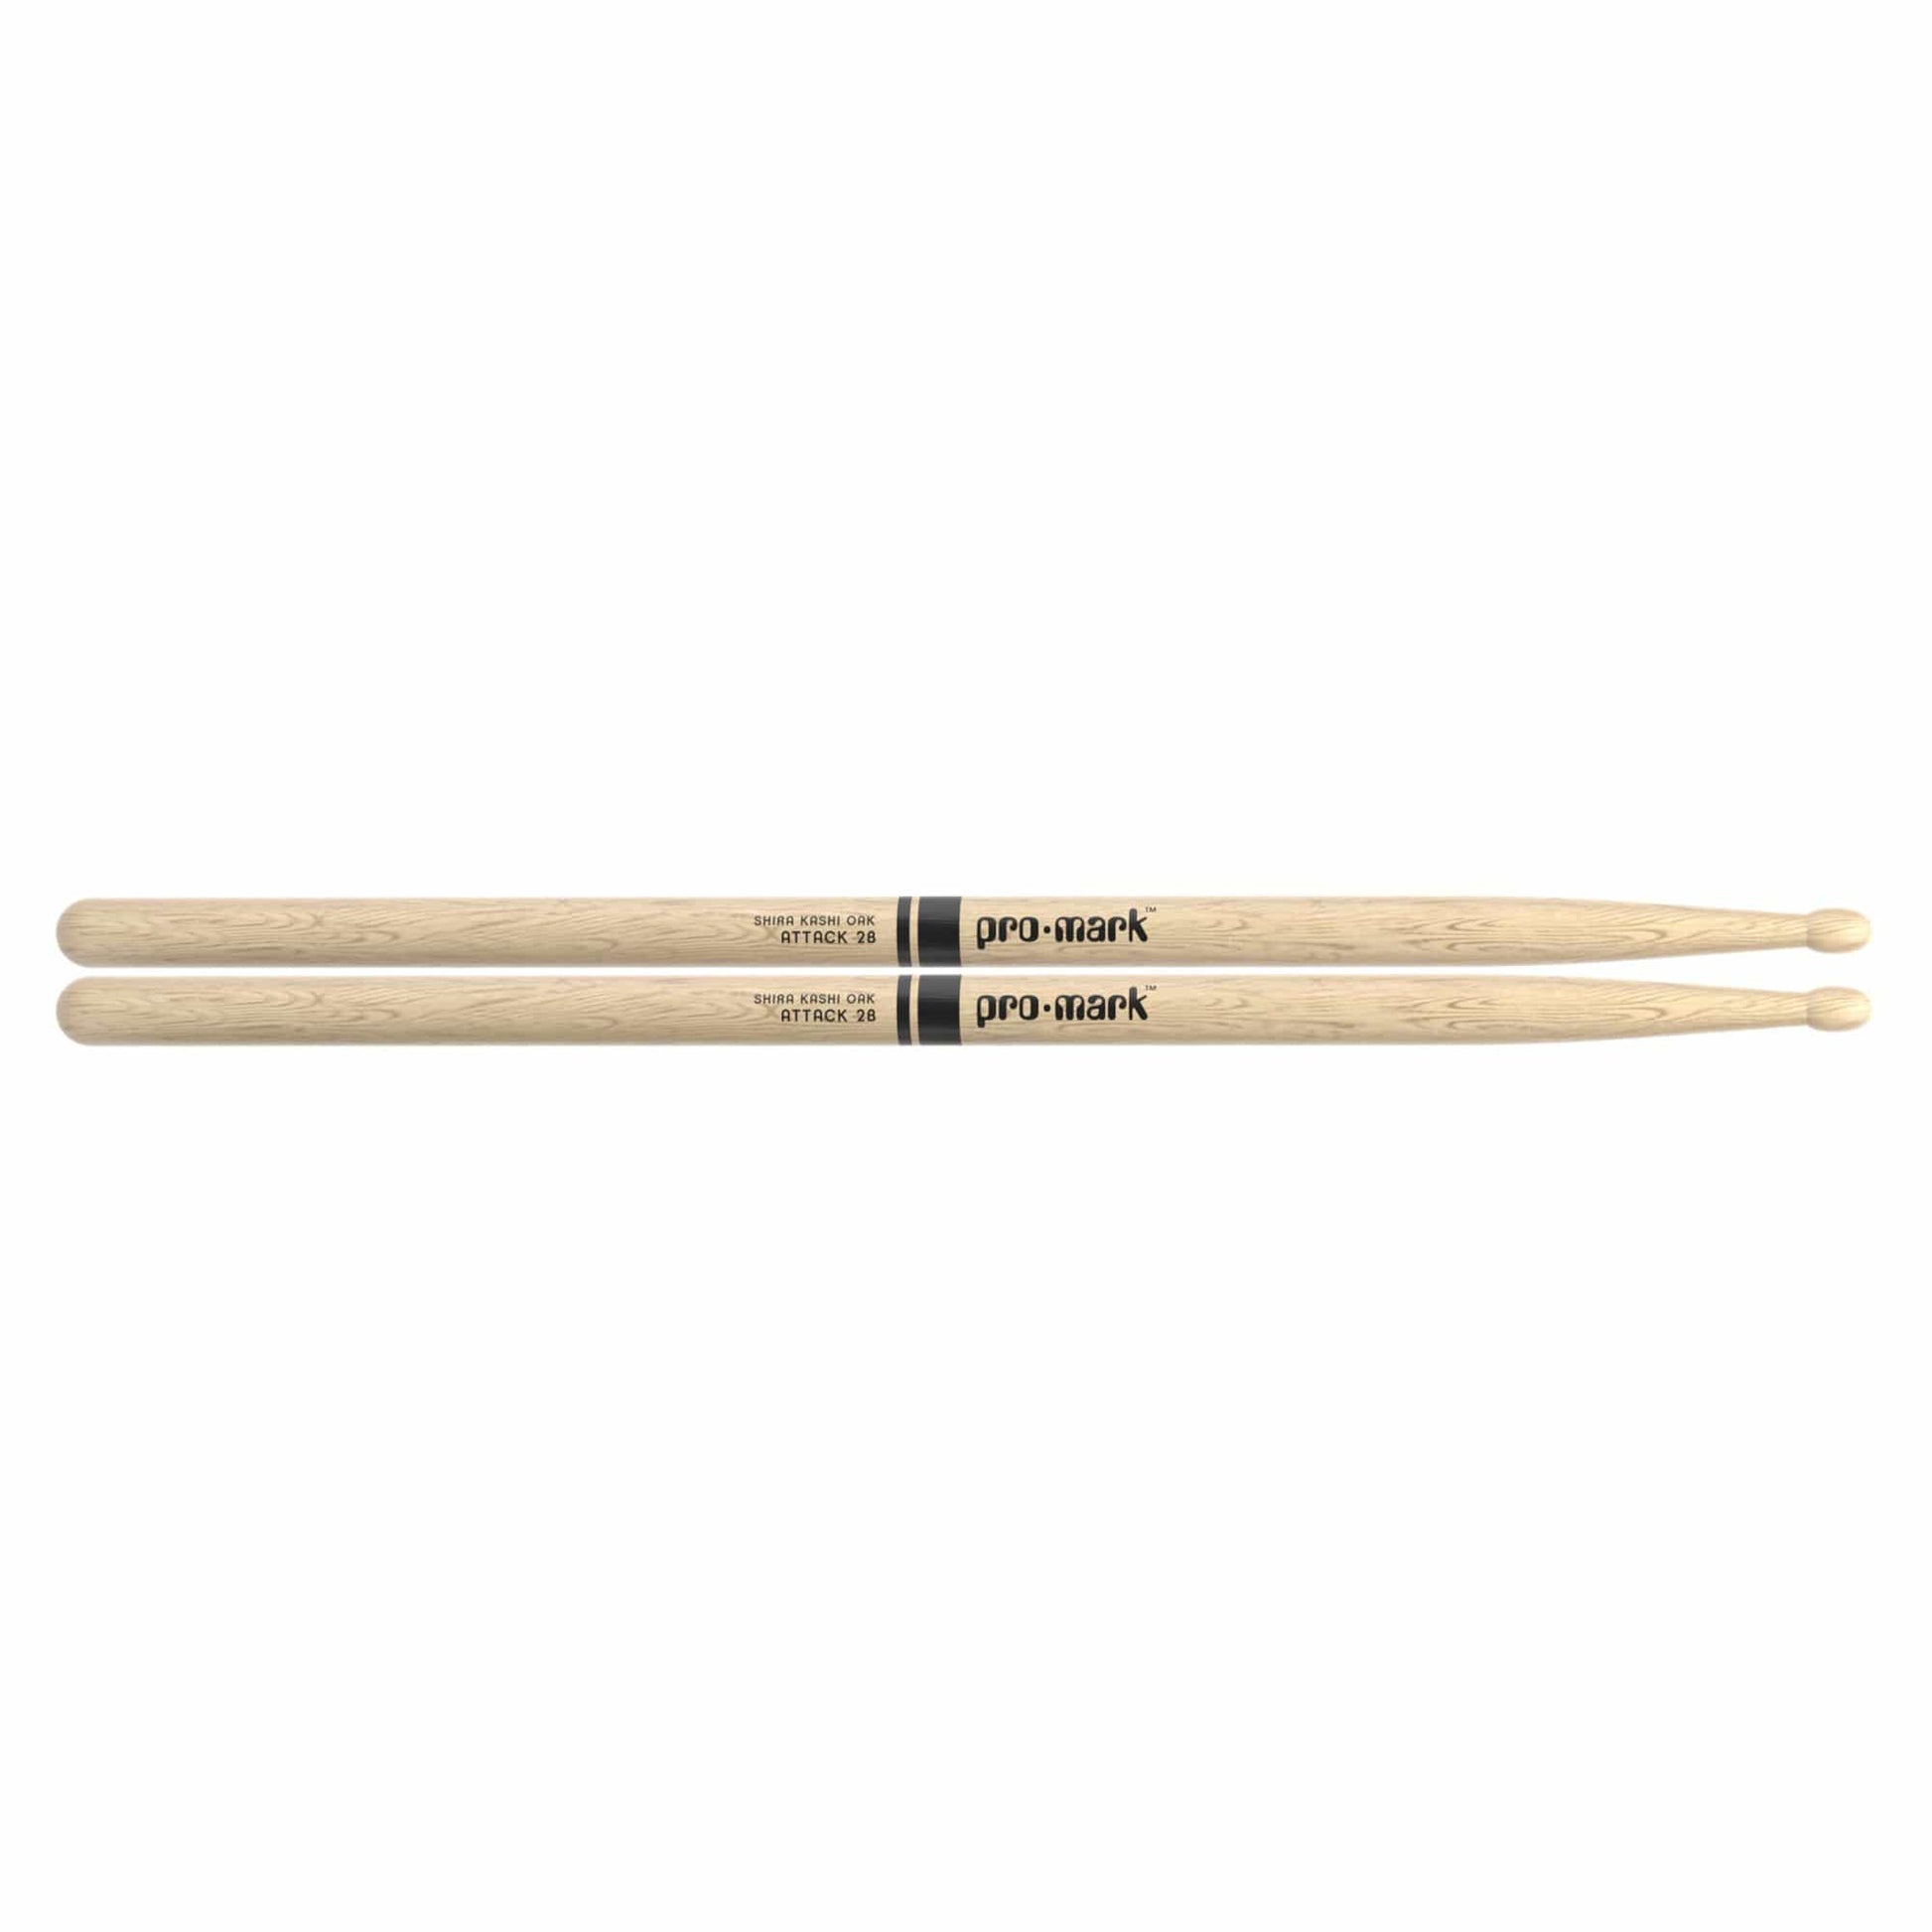 Promark Shira Kashi Oak 2B Wood Tip Drum Sticks Drums and Percussion / Parts and Accessories / Drum Sticks and Mallets